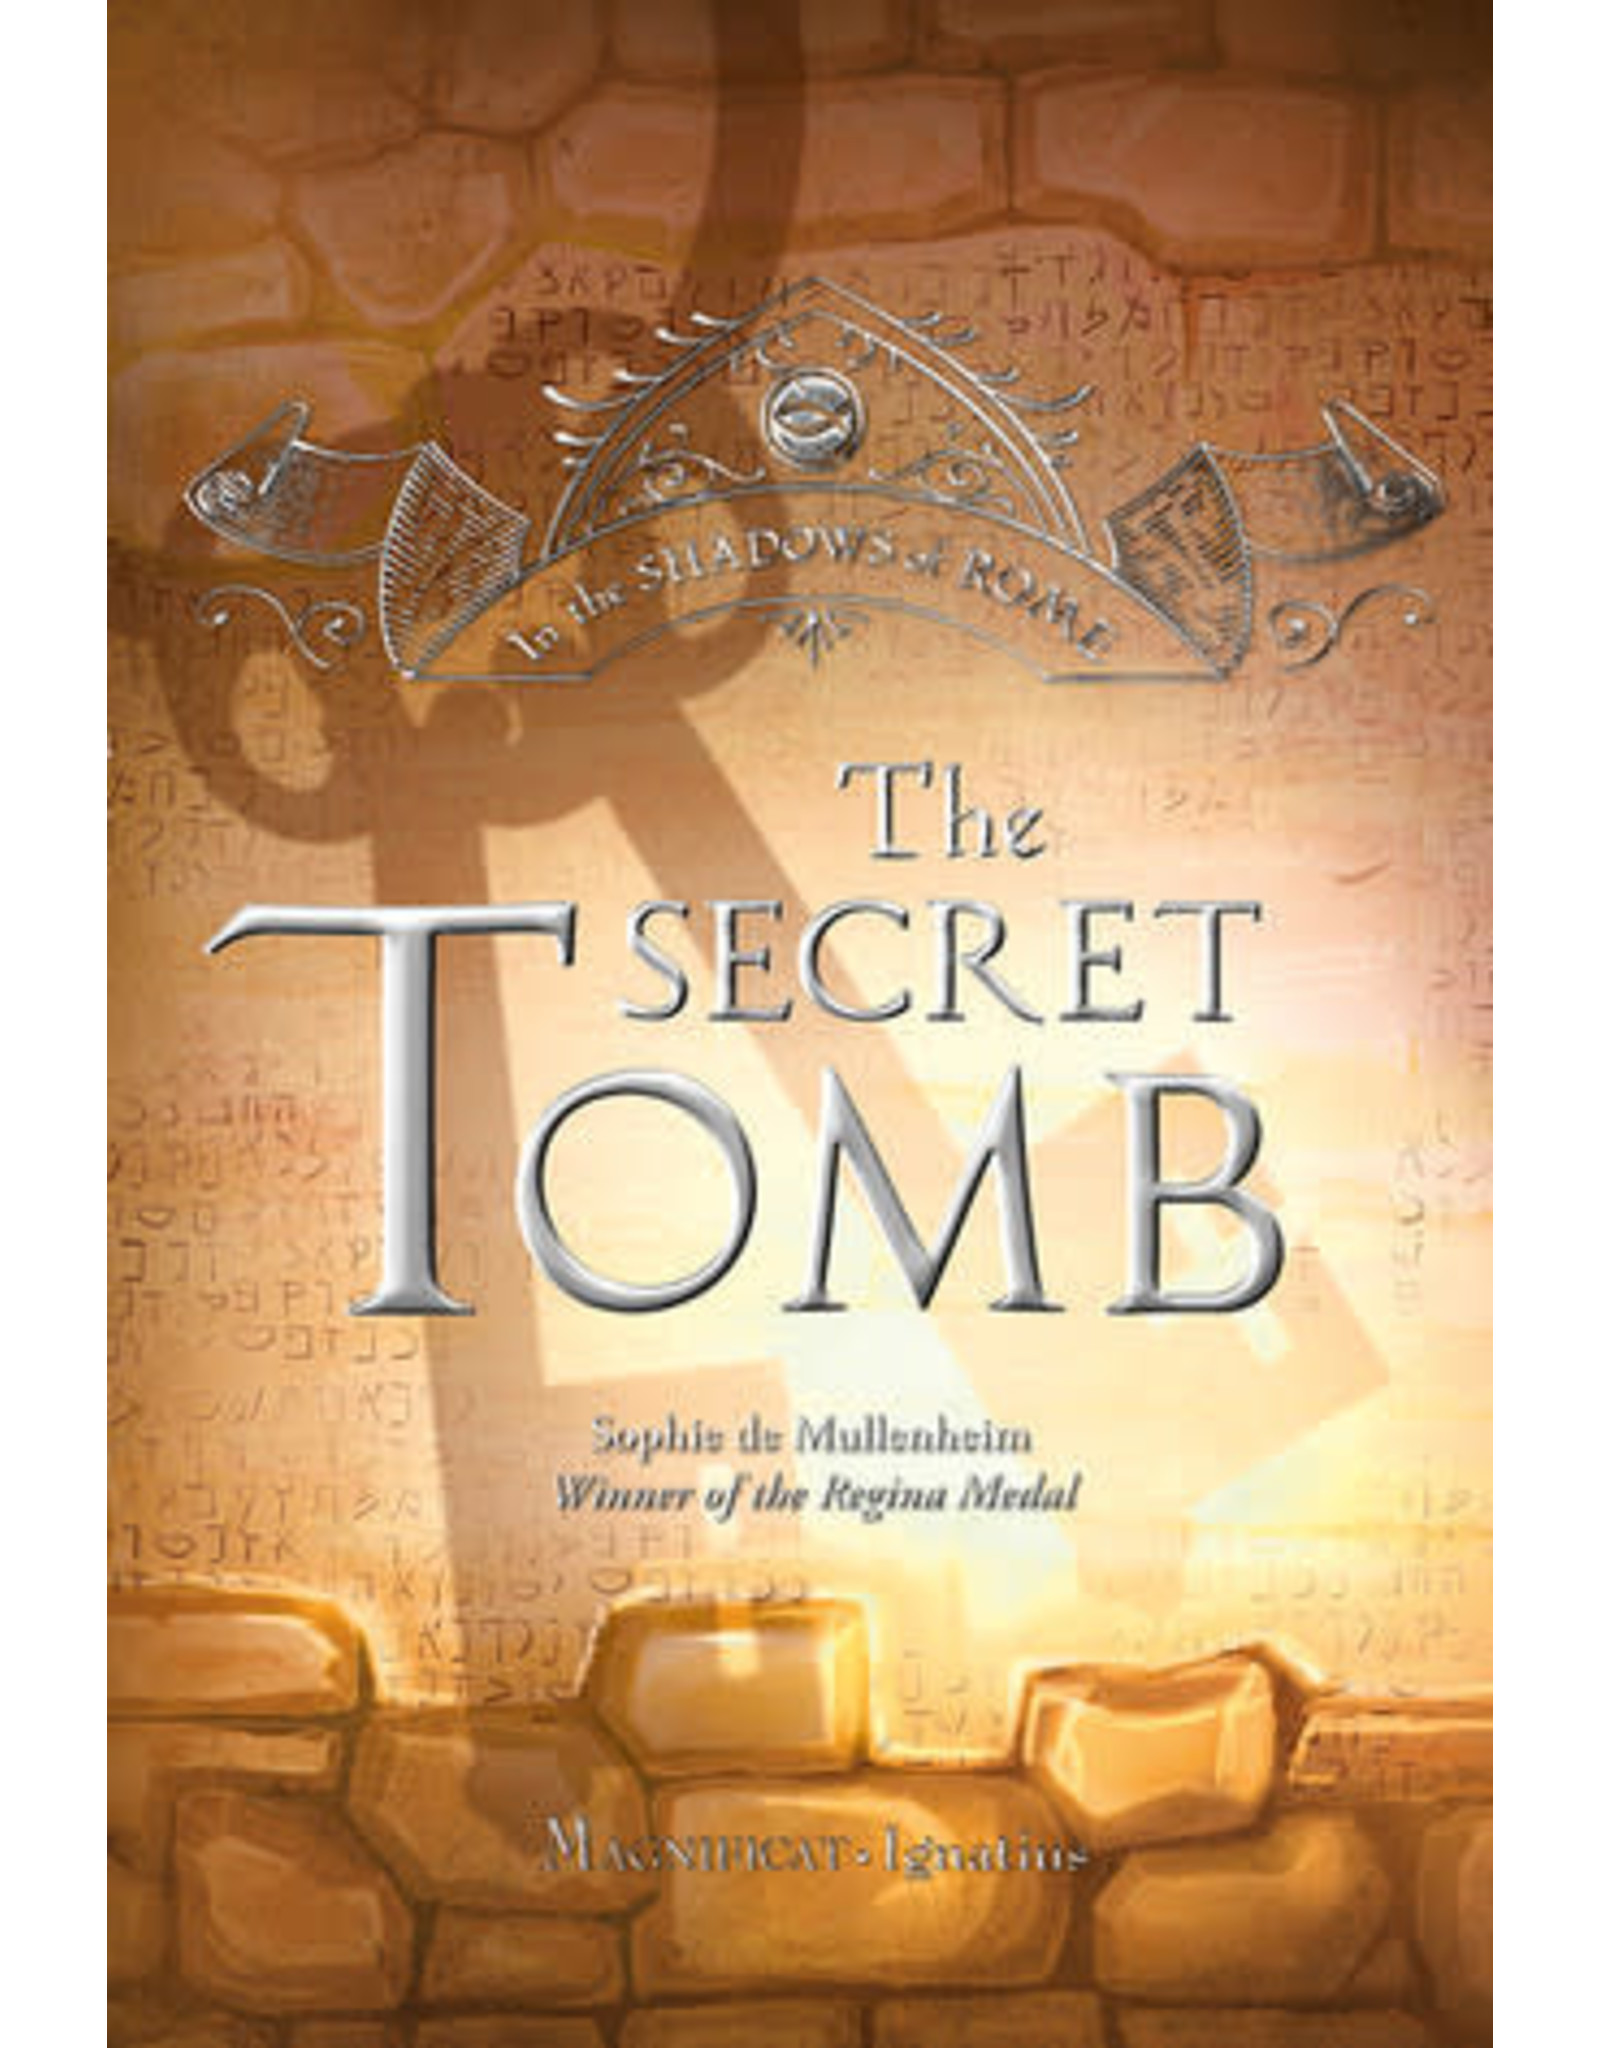 The Secret Tomb (In the Shadows of Rome Vol. 5)